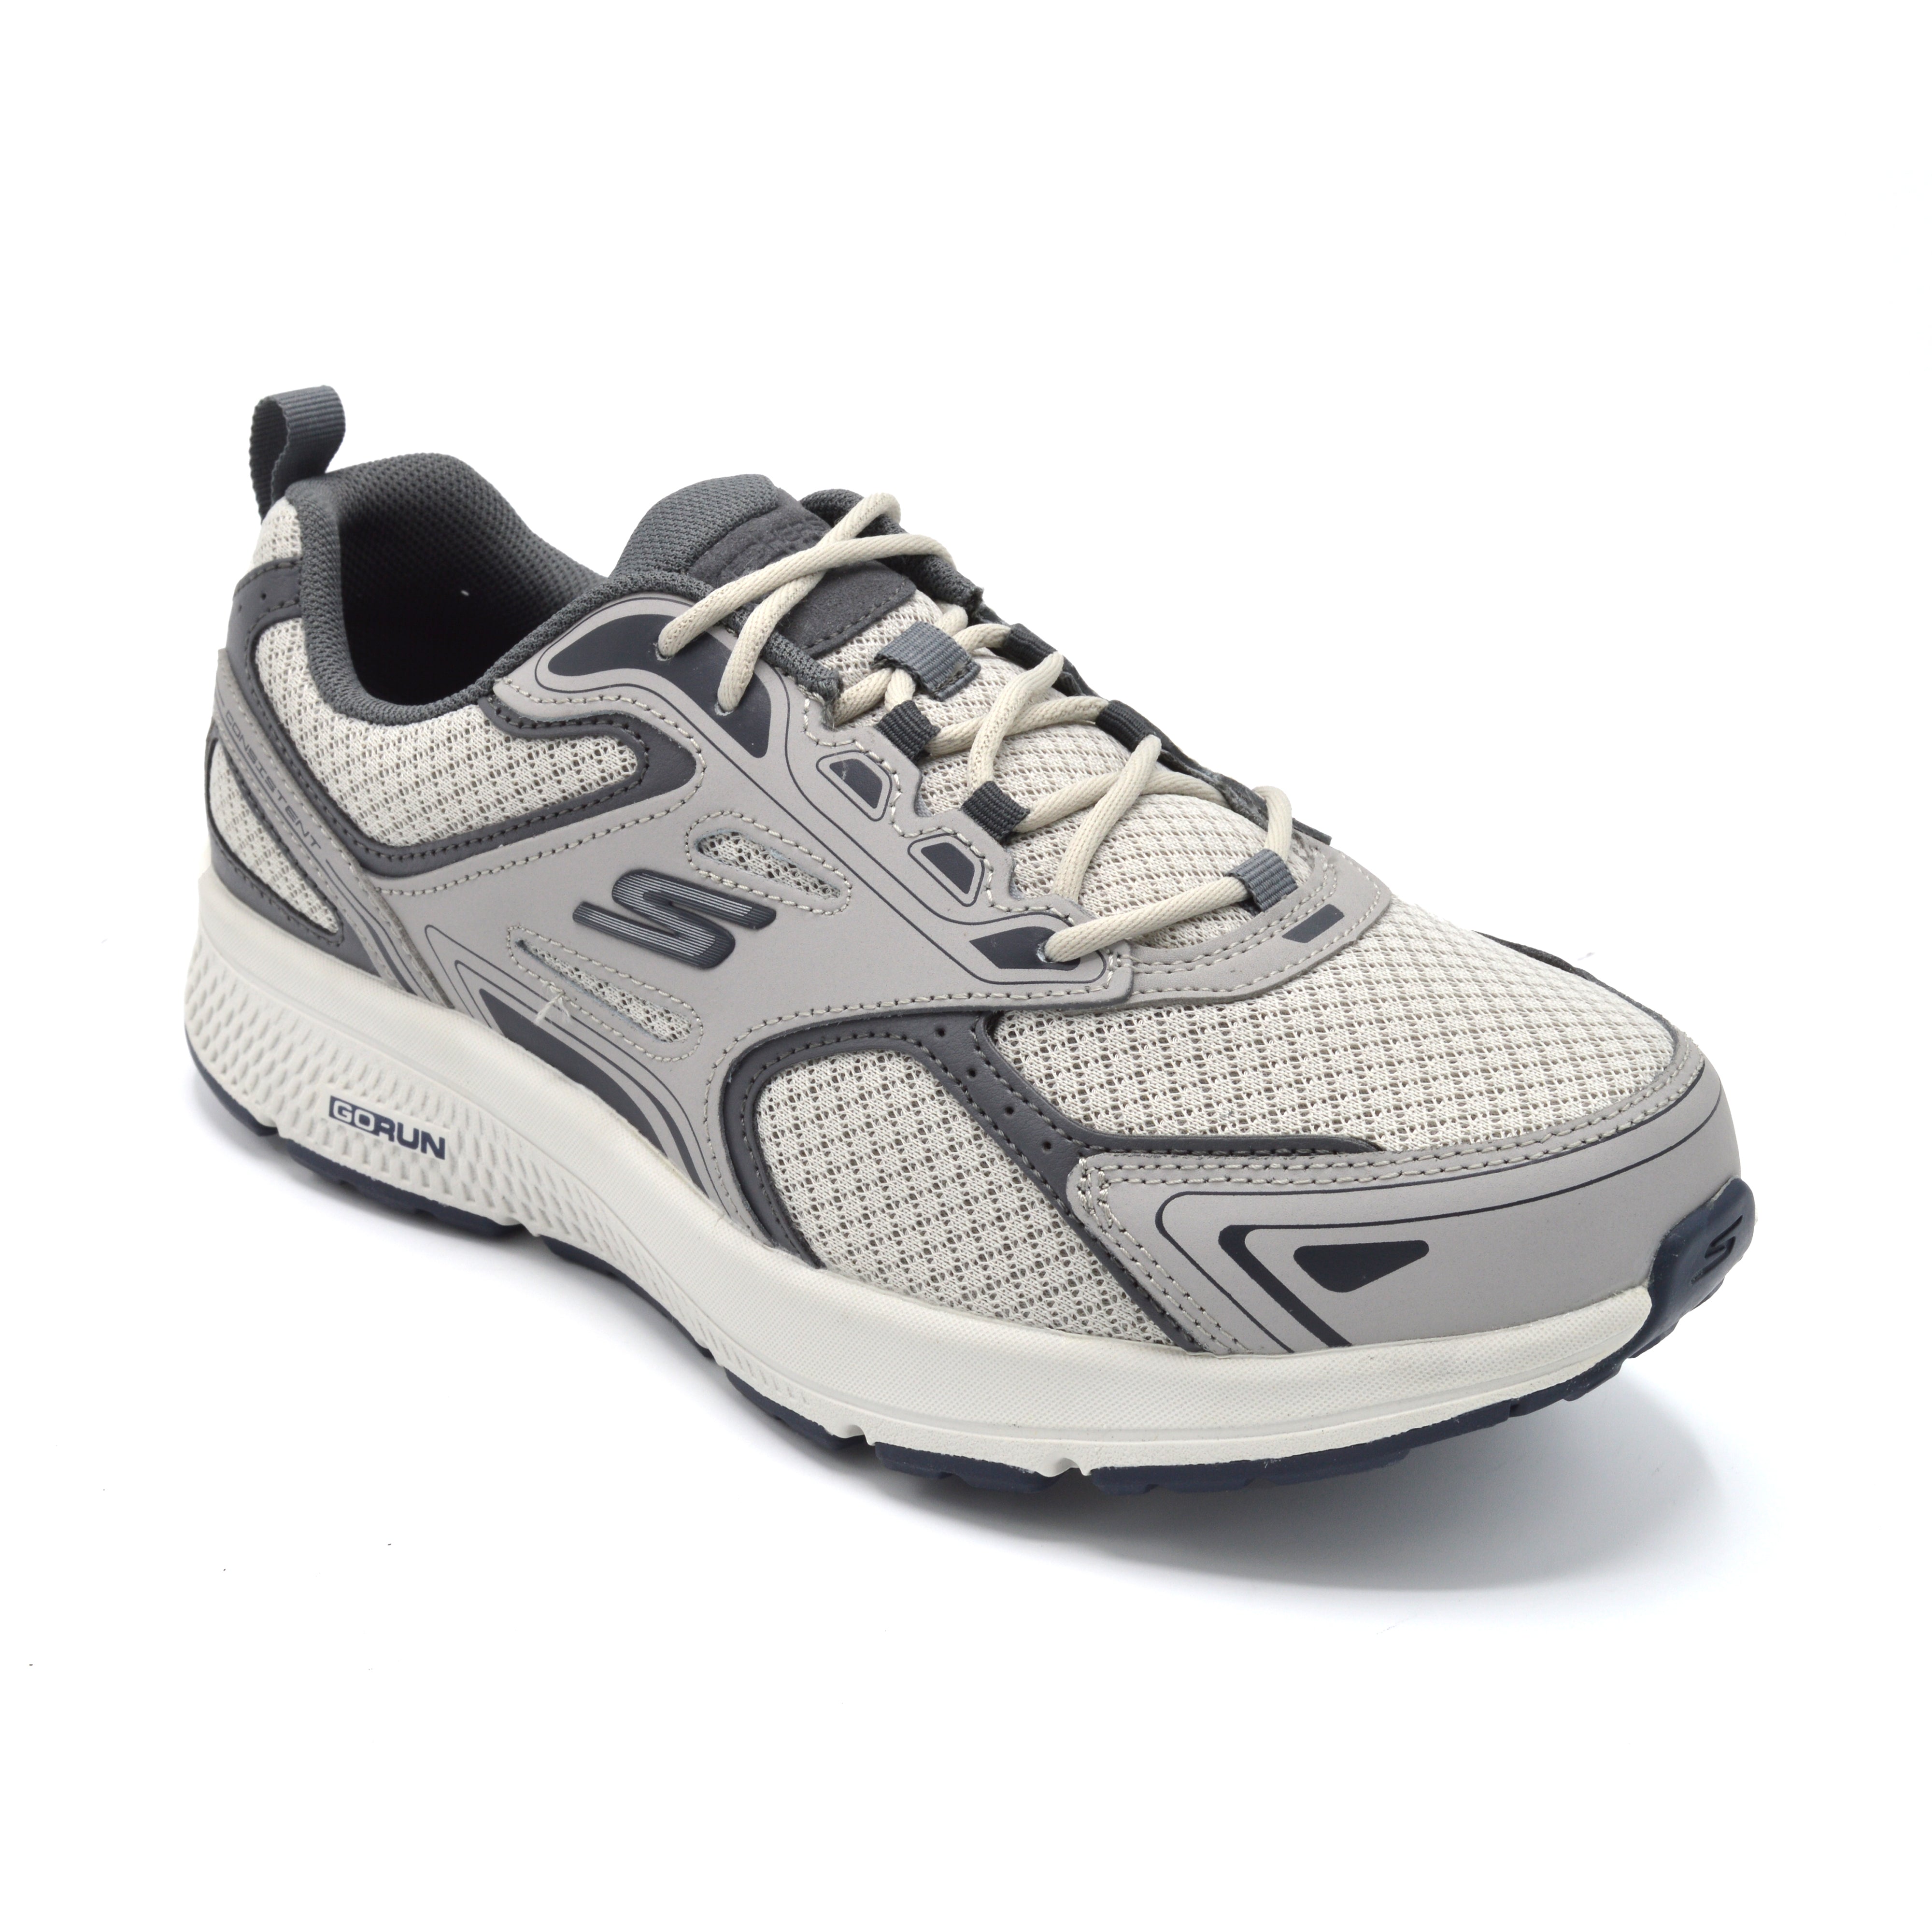 Skechers Go Run Consistent - Mens Wide Fit Trainer - 4E Fitting - Grey